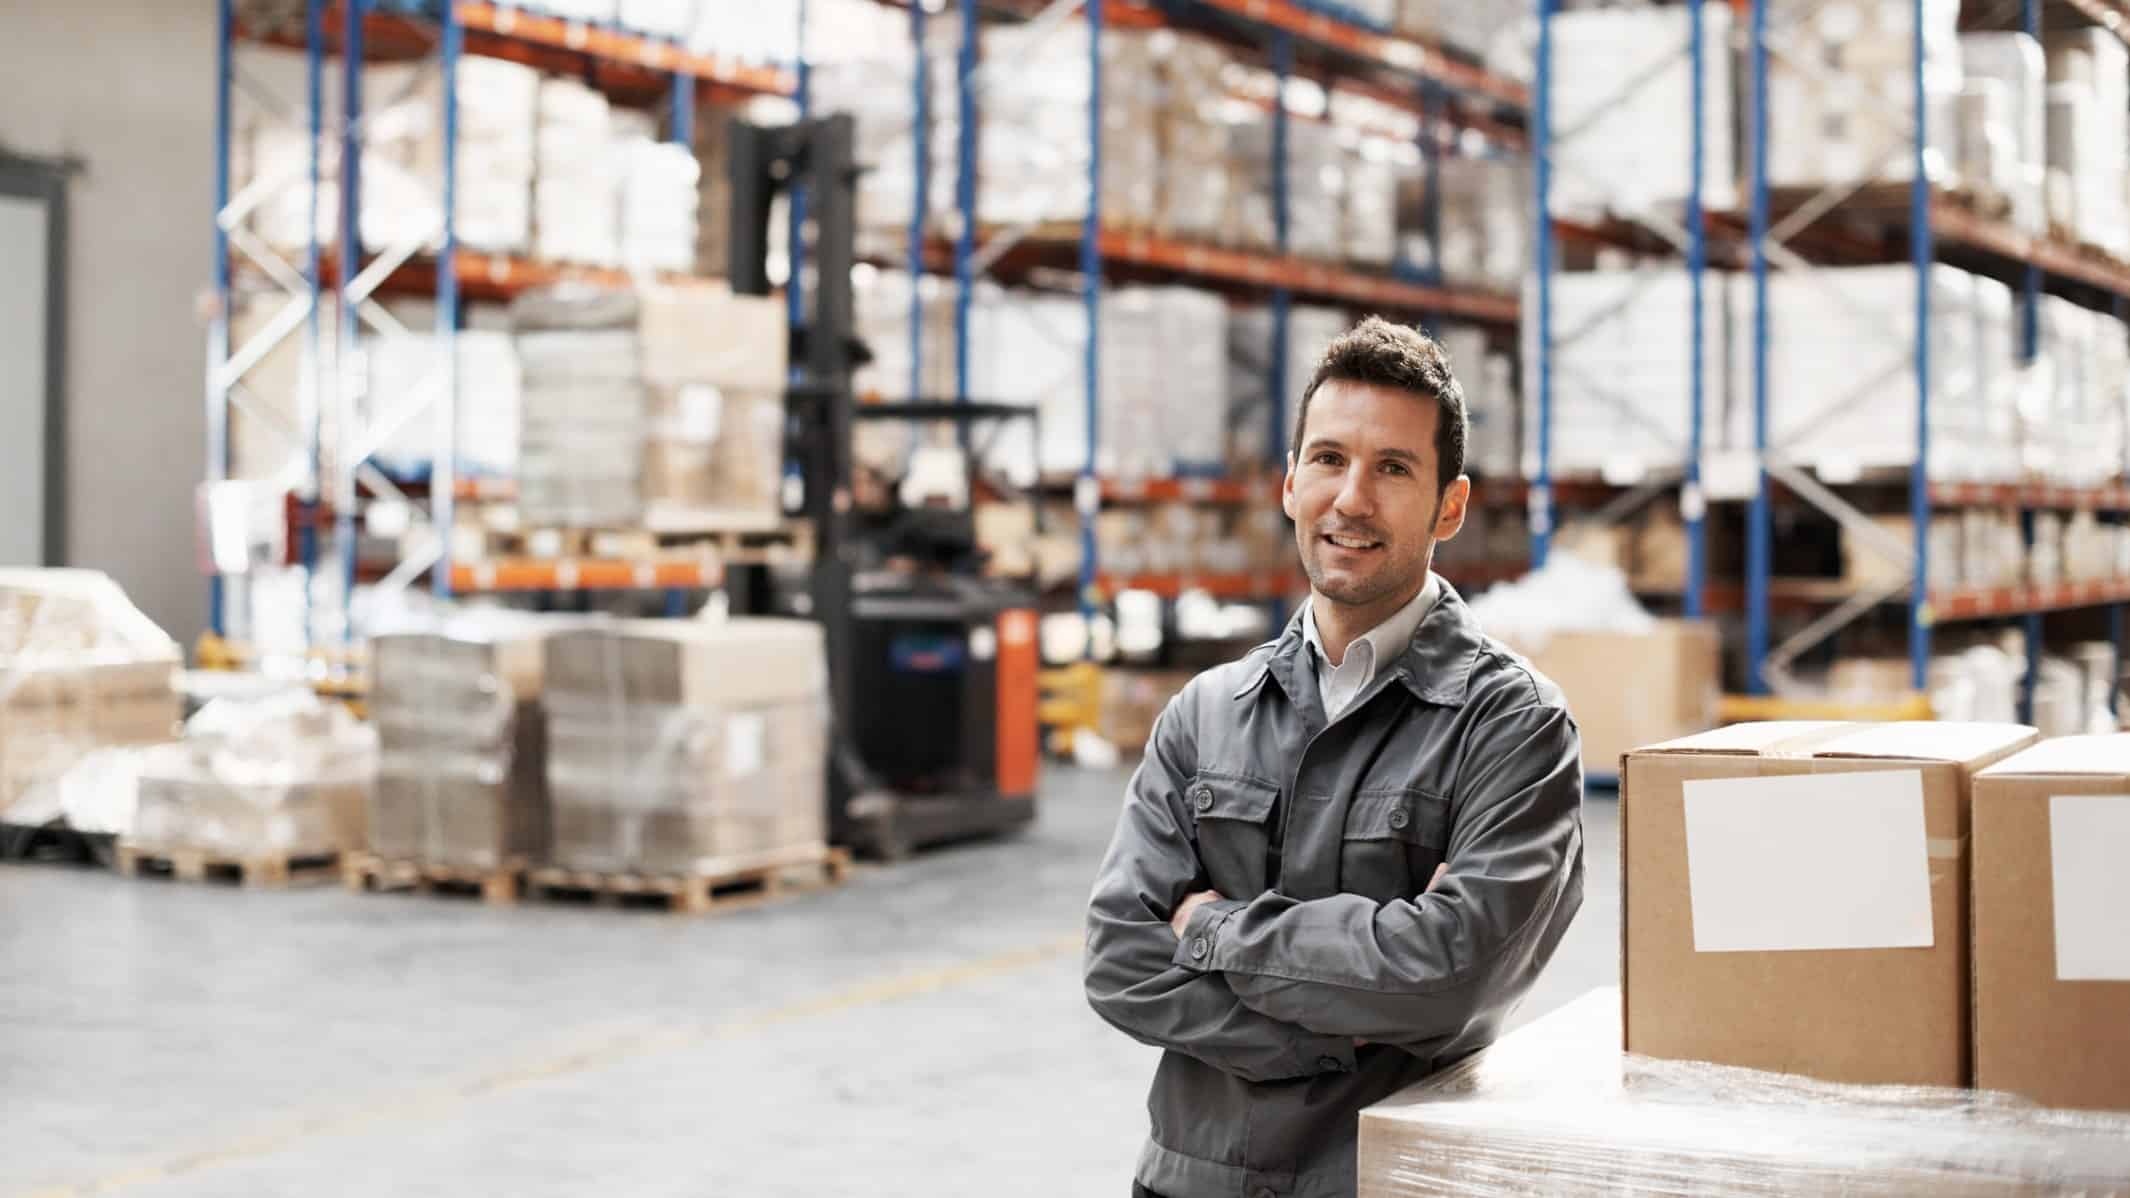 A warehouse storeman stands with his arms folded in front of a well-stocked warehouse interior with goods and moving equipment in the background.